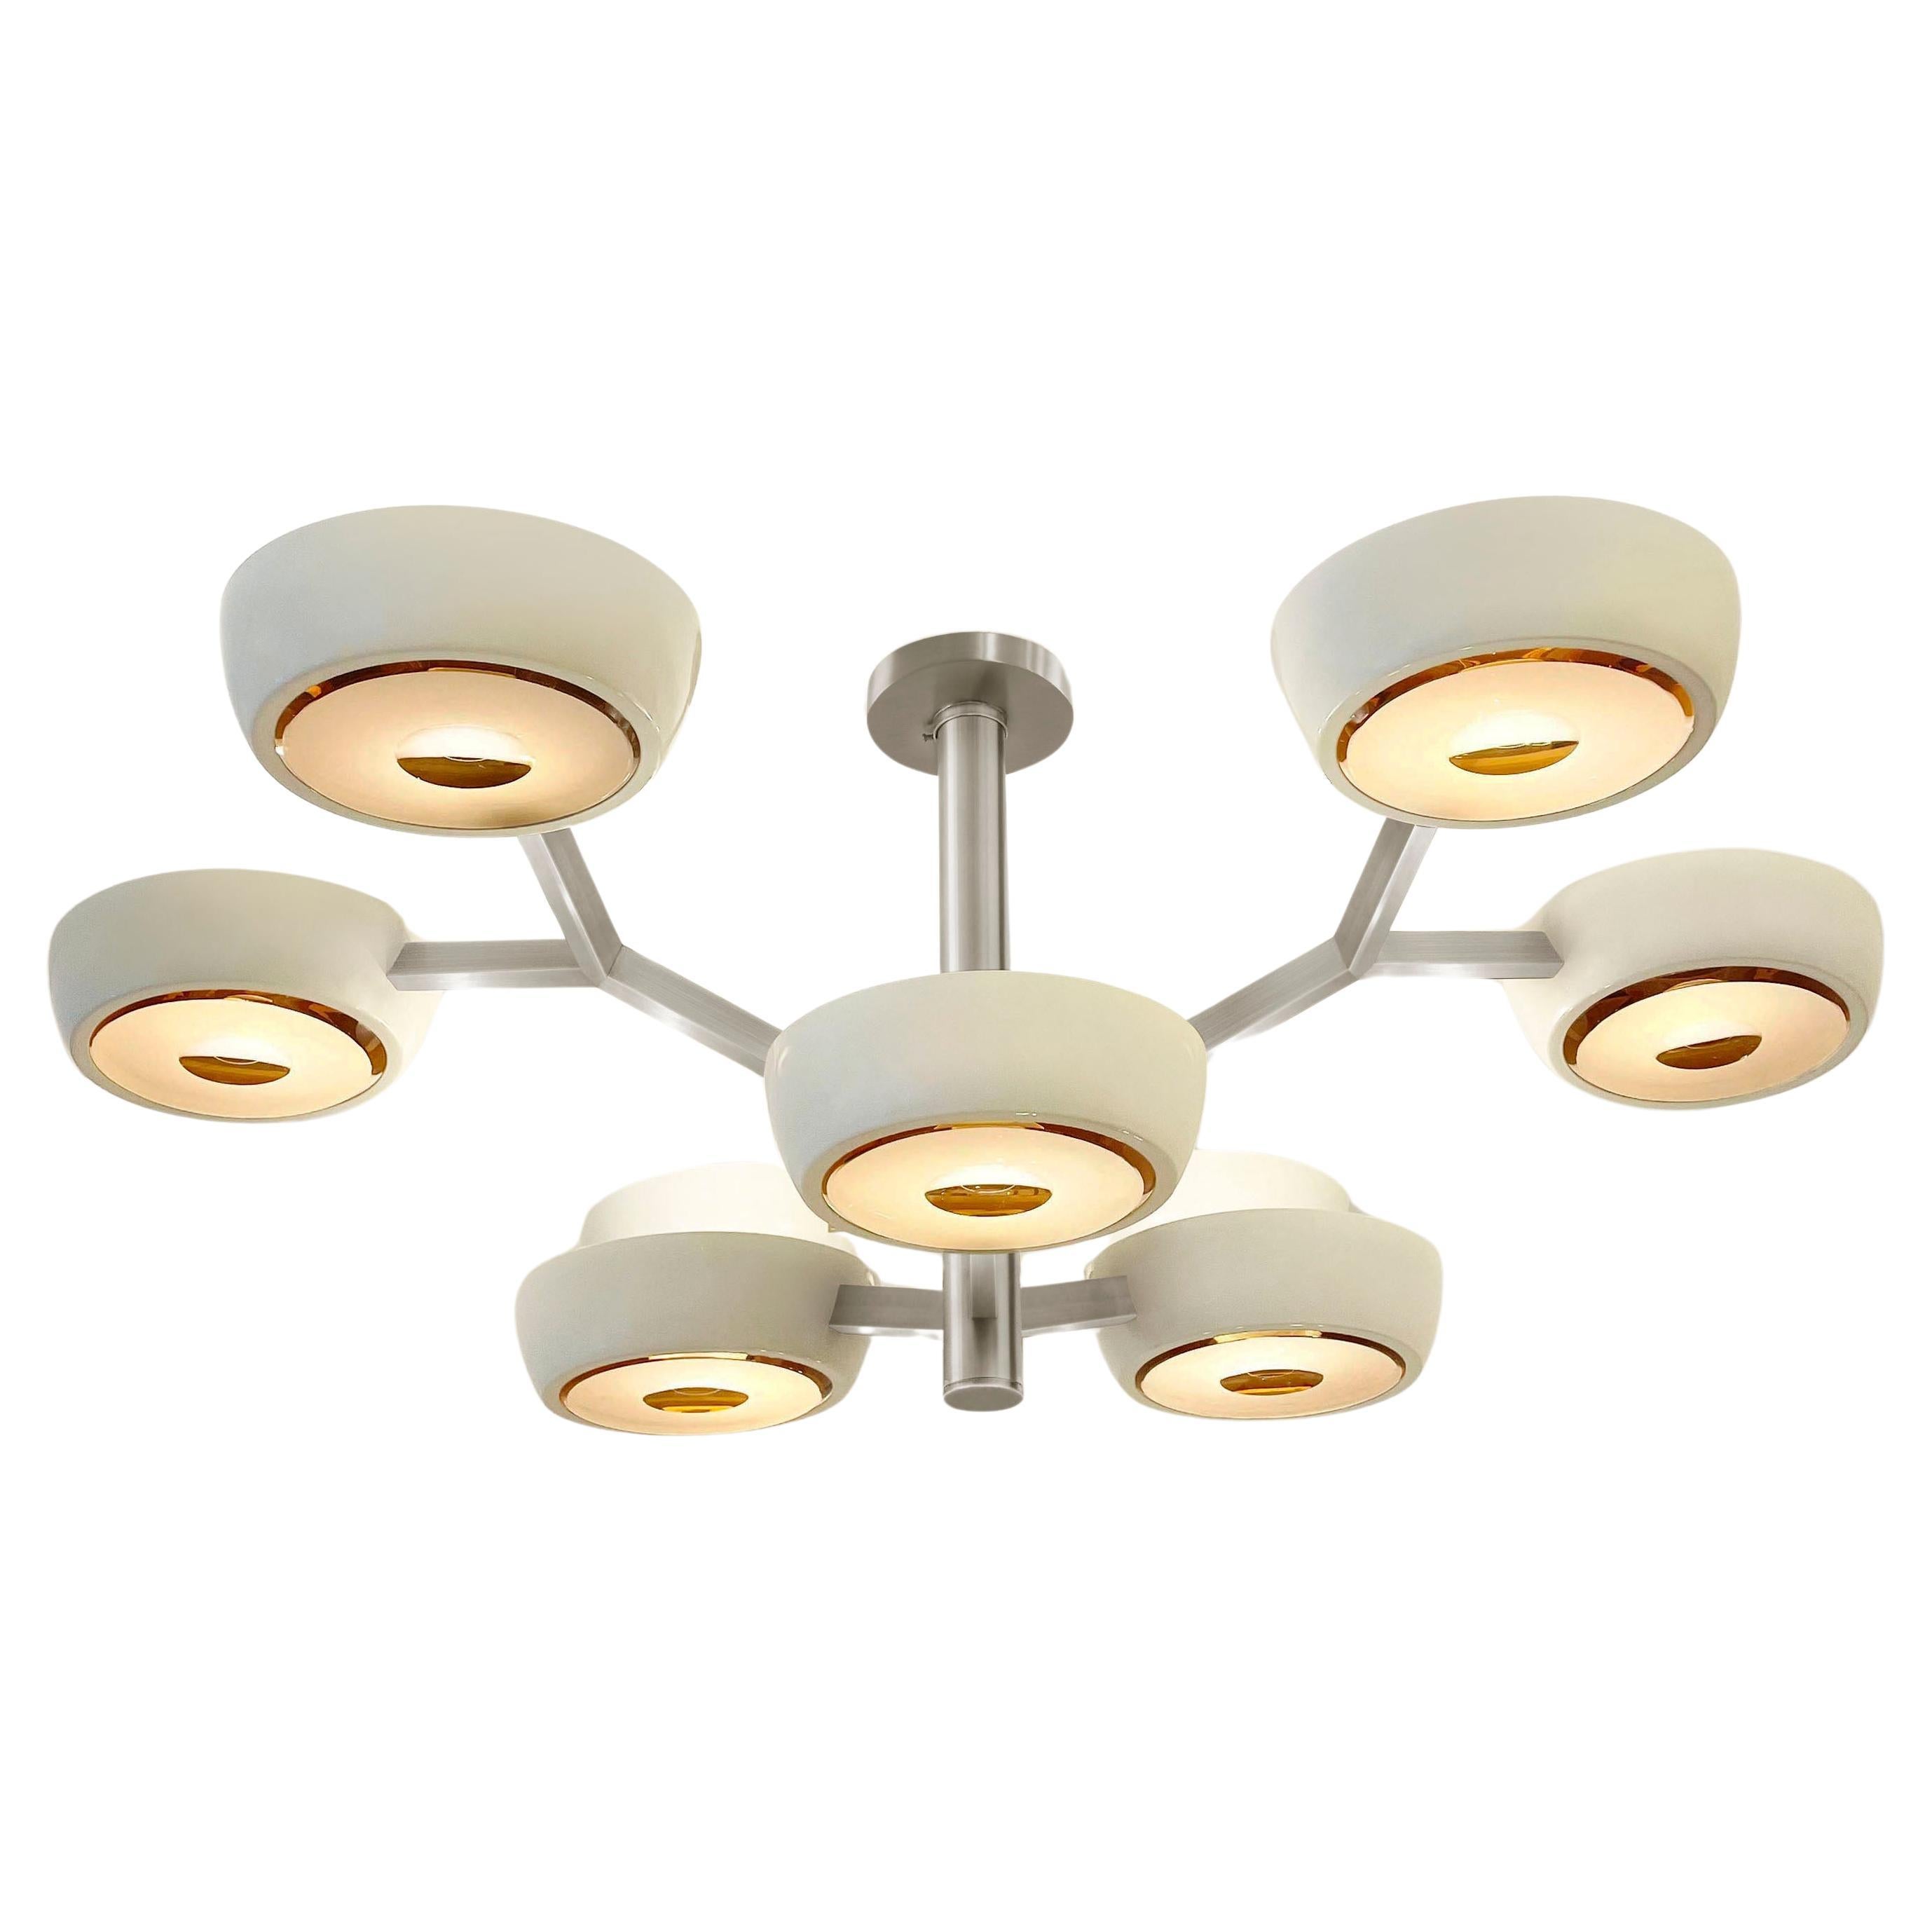 Rose Ceiling Light by Gaspare Asaro-Satin Nickel Finish For Sale